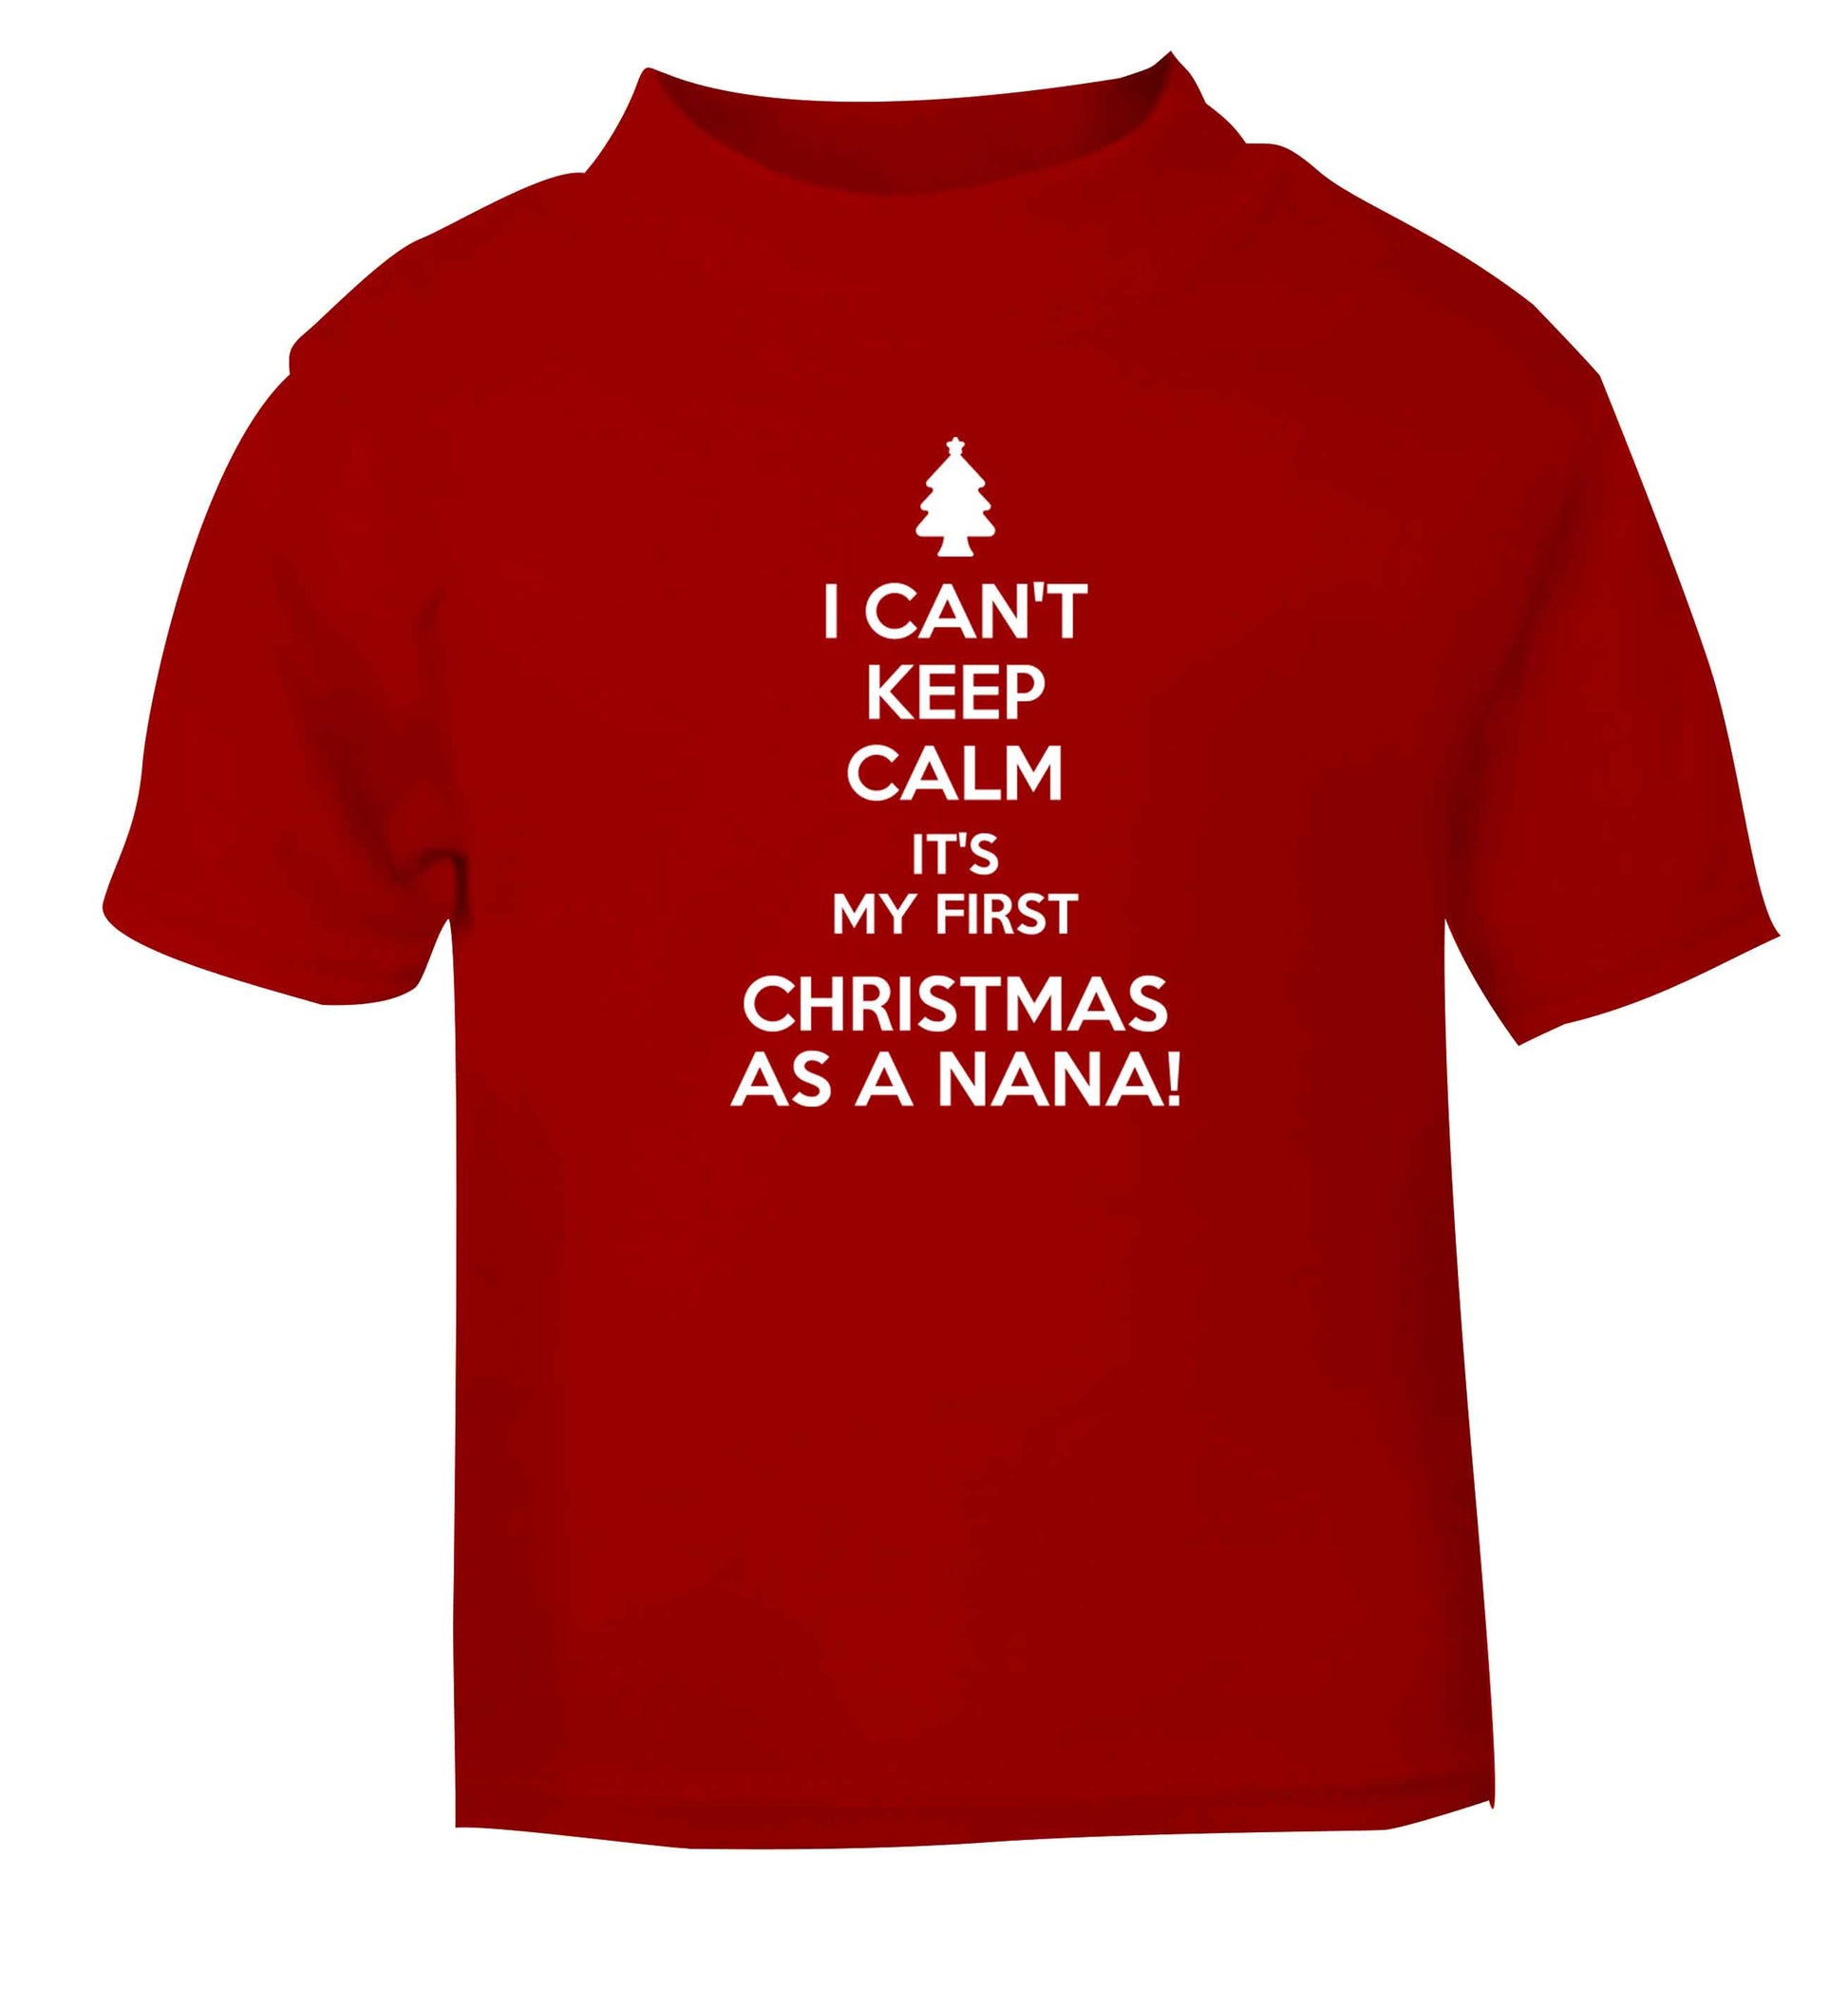 I can't keep calm it's my first Christmas as a nana! red Baby Toddler Tshirt 2 Years